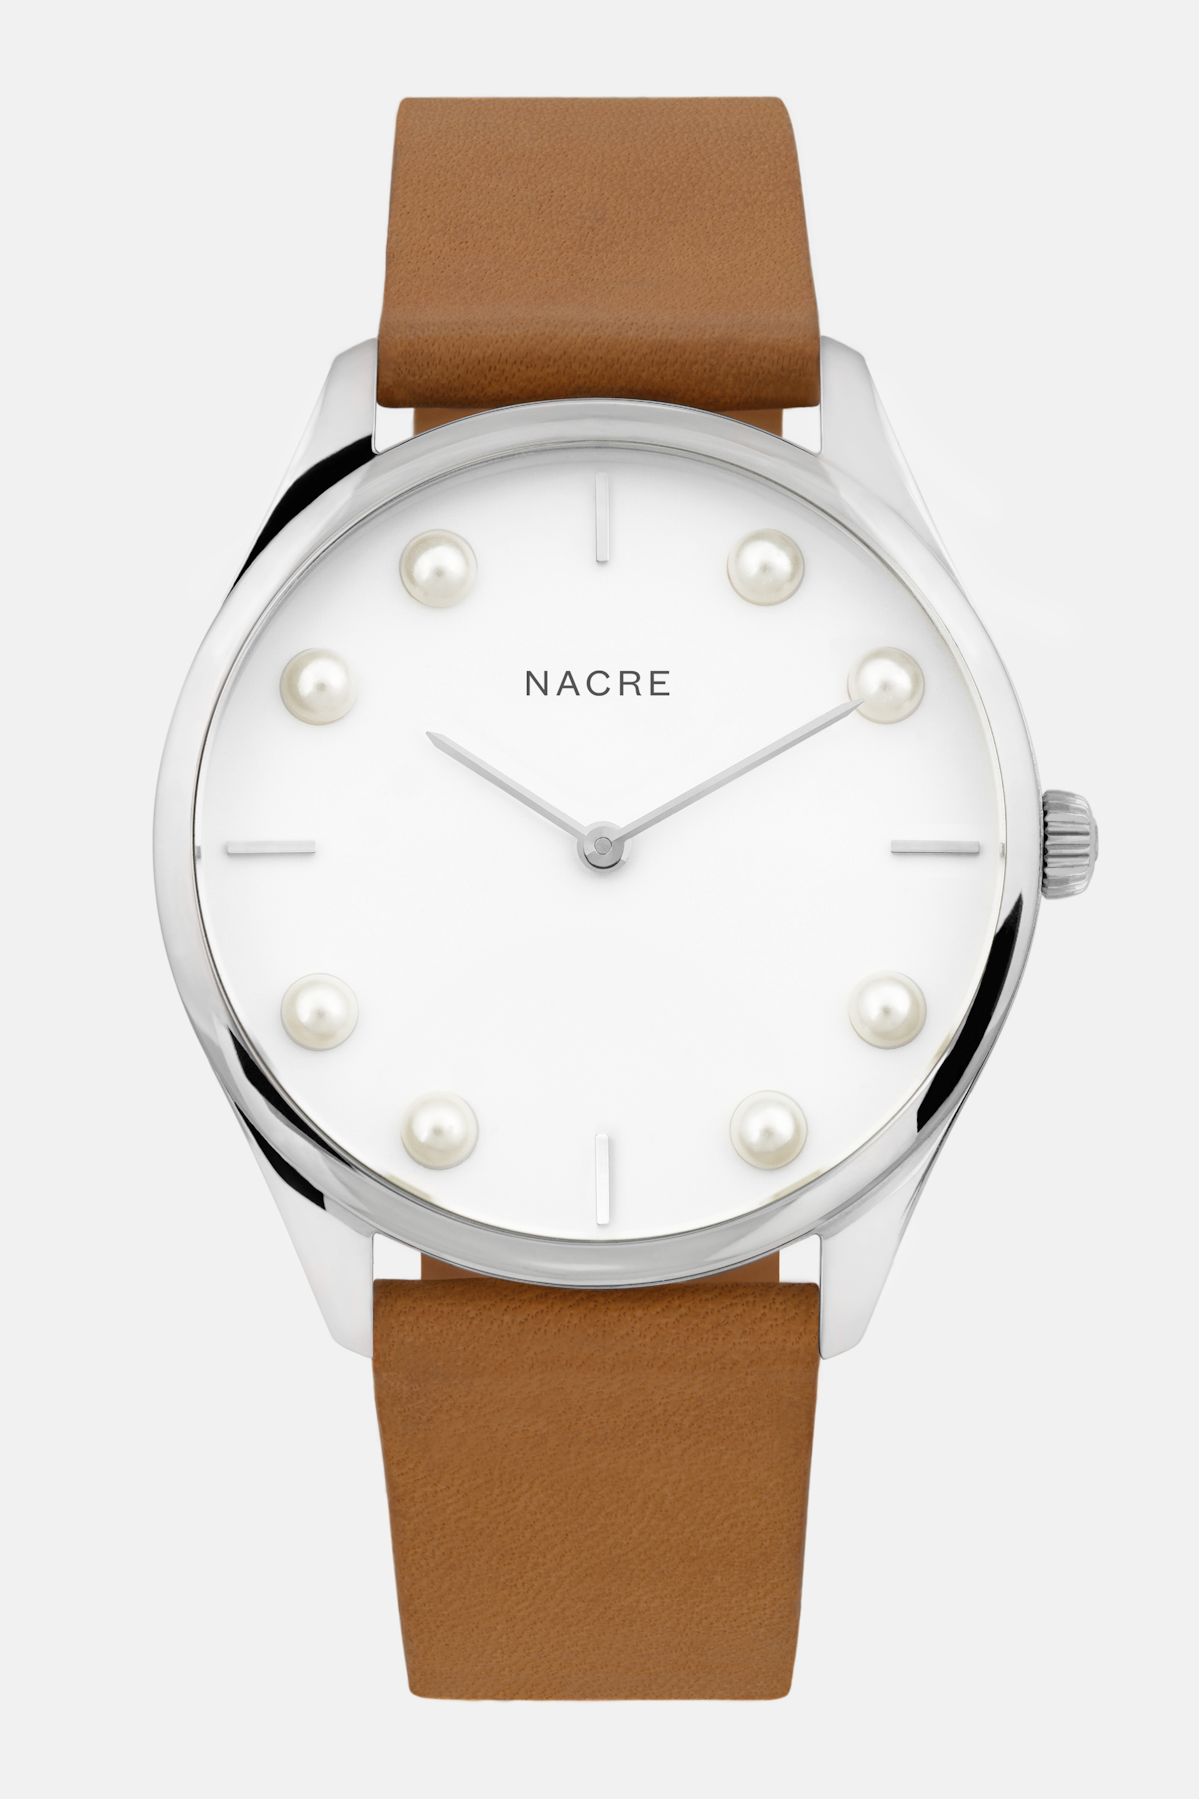 Sign Up and Get Best Offer At Nacre Watches